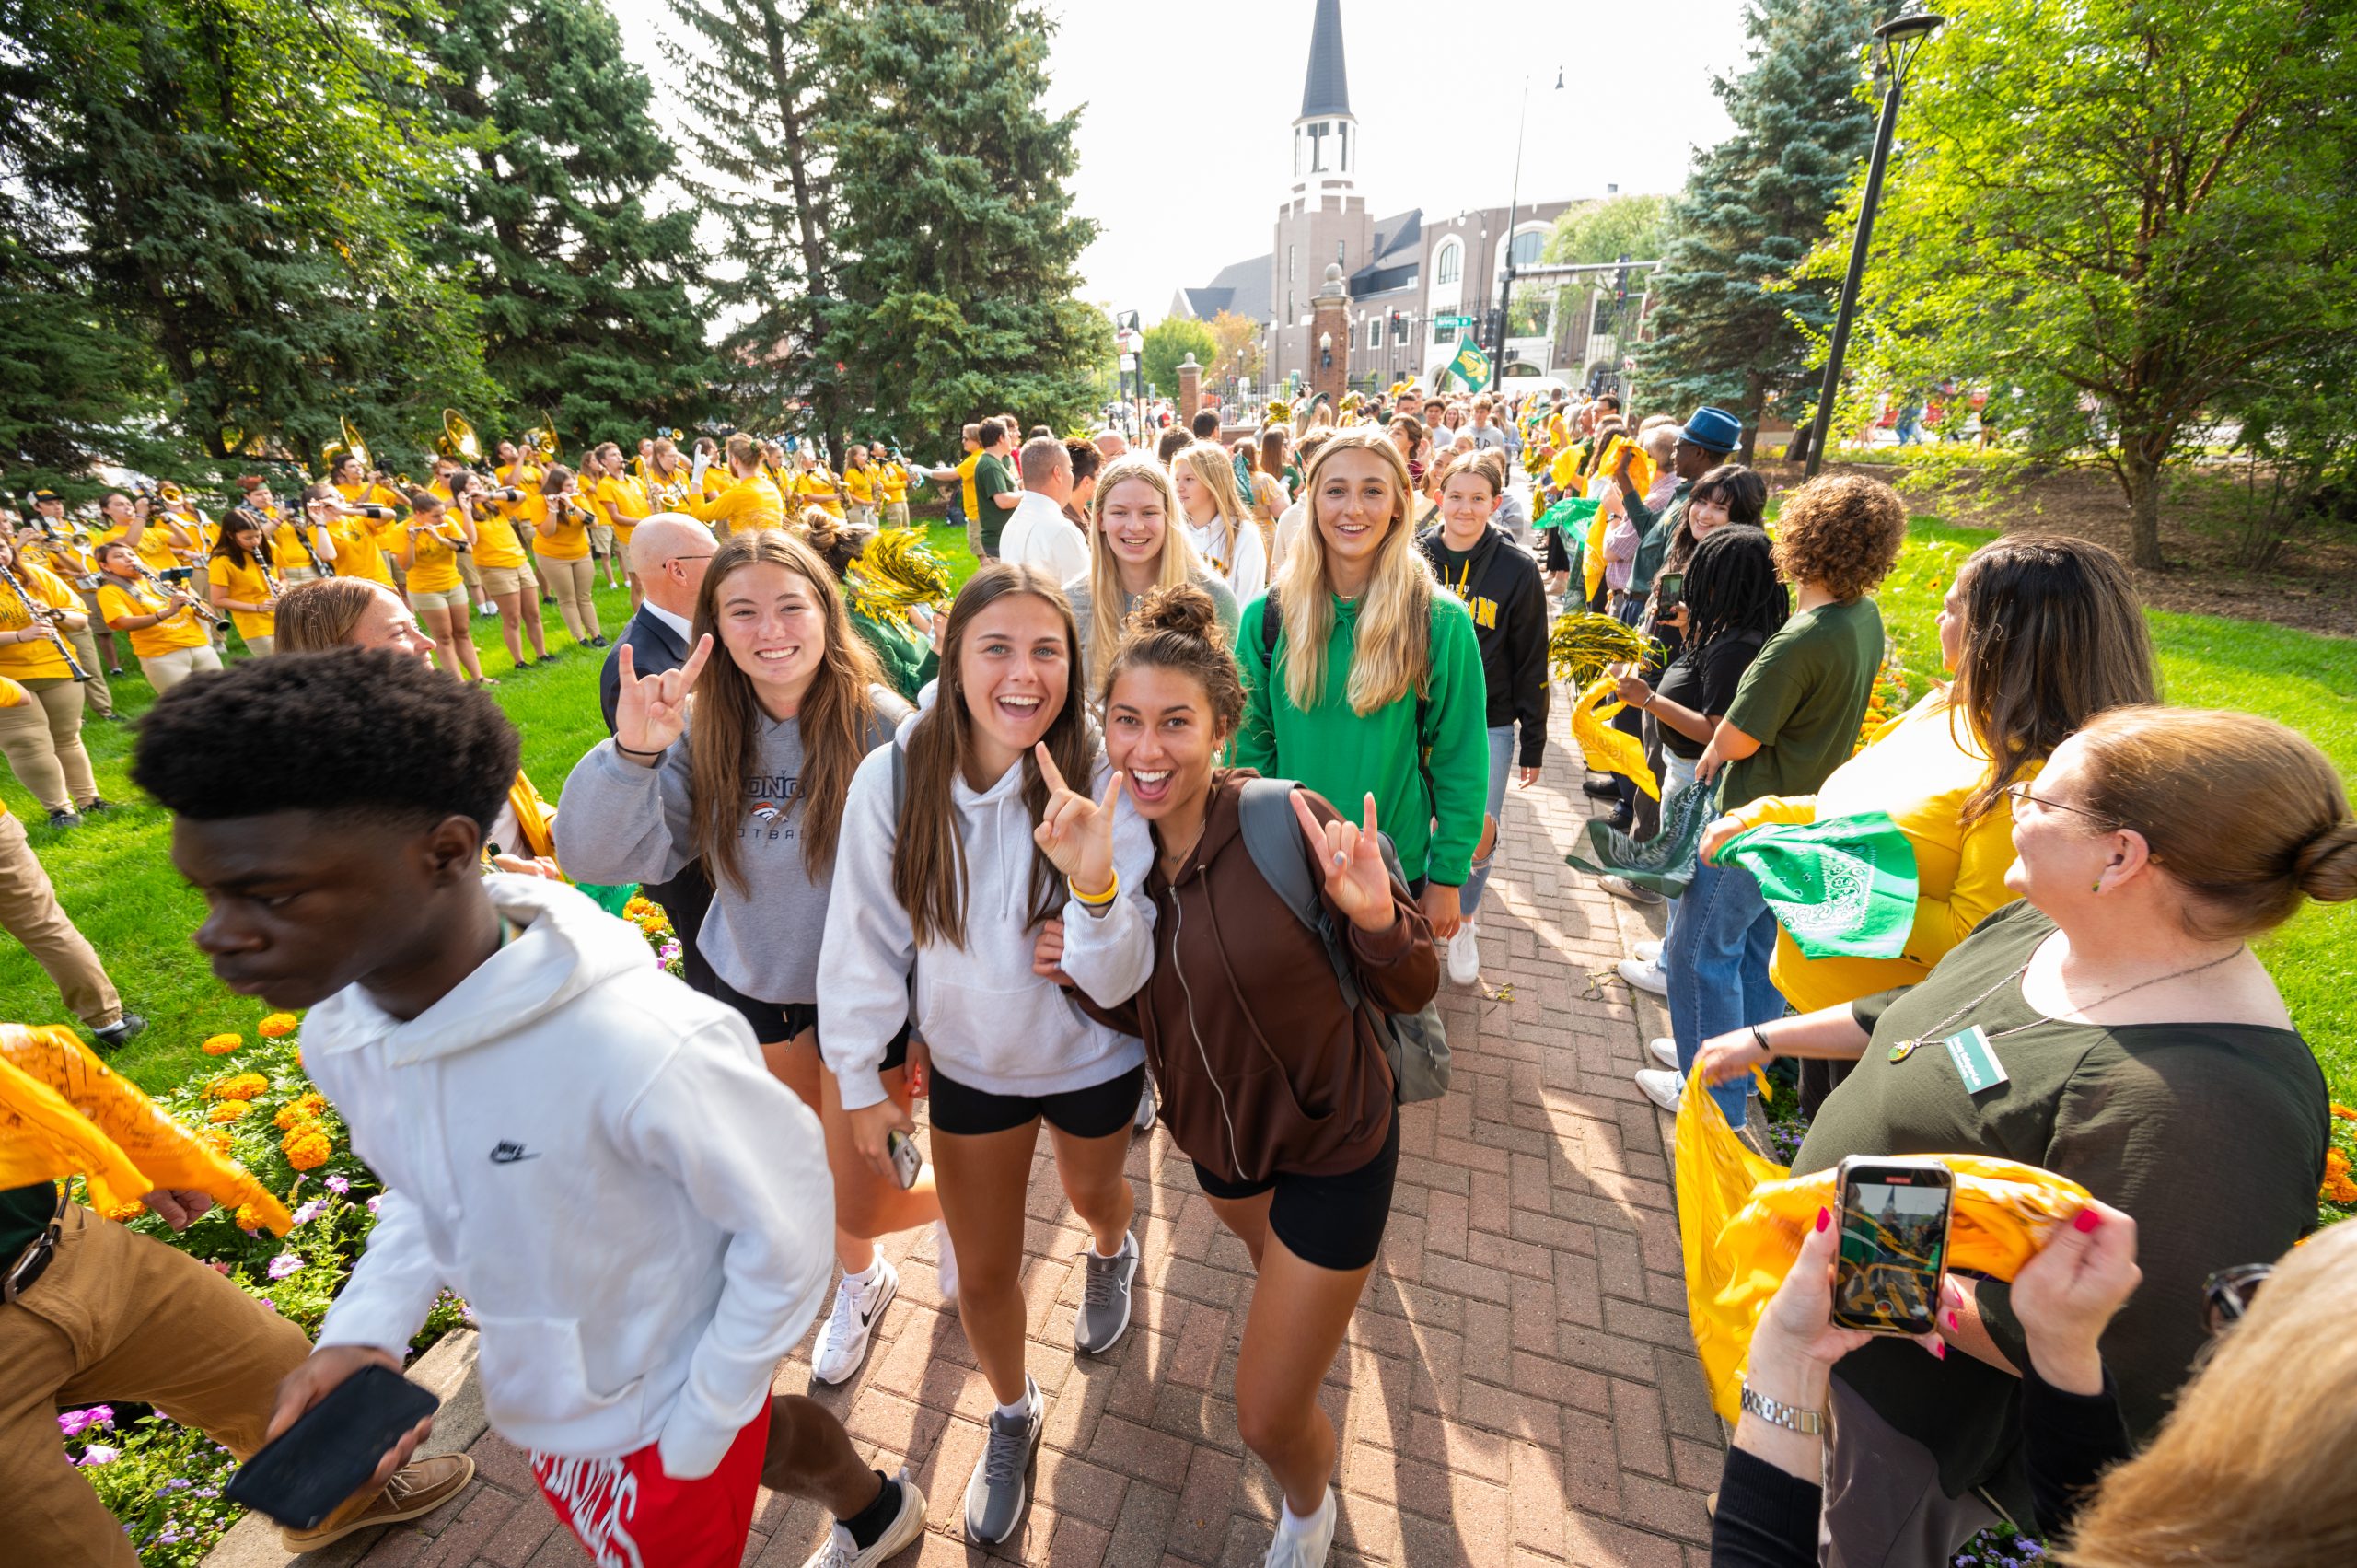 New North Dakota State University (NDSU) students are welcomed through the front gates.